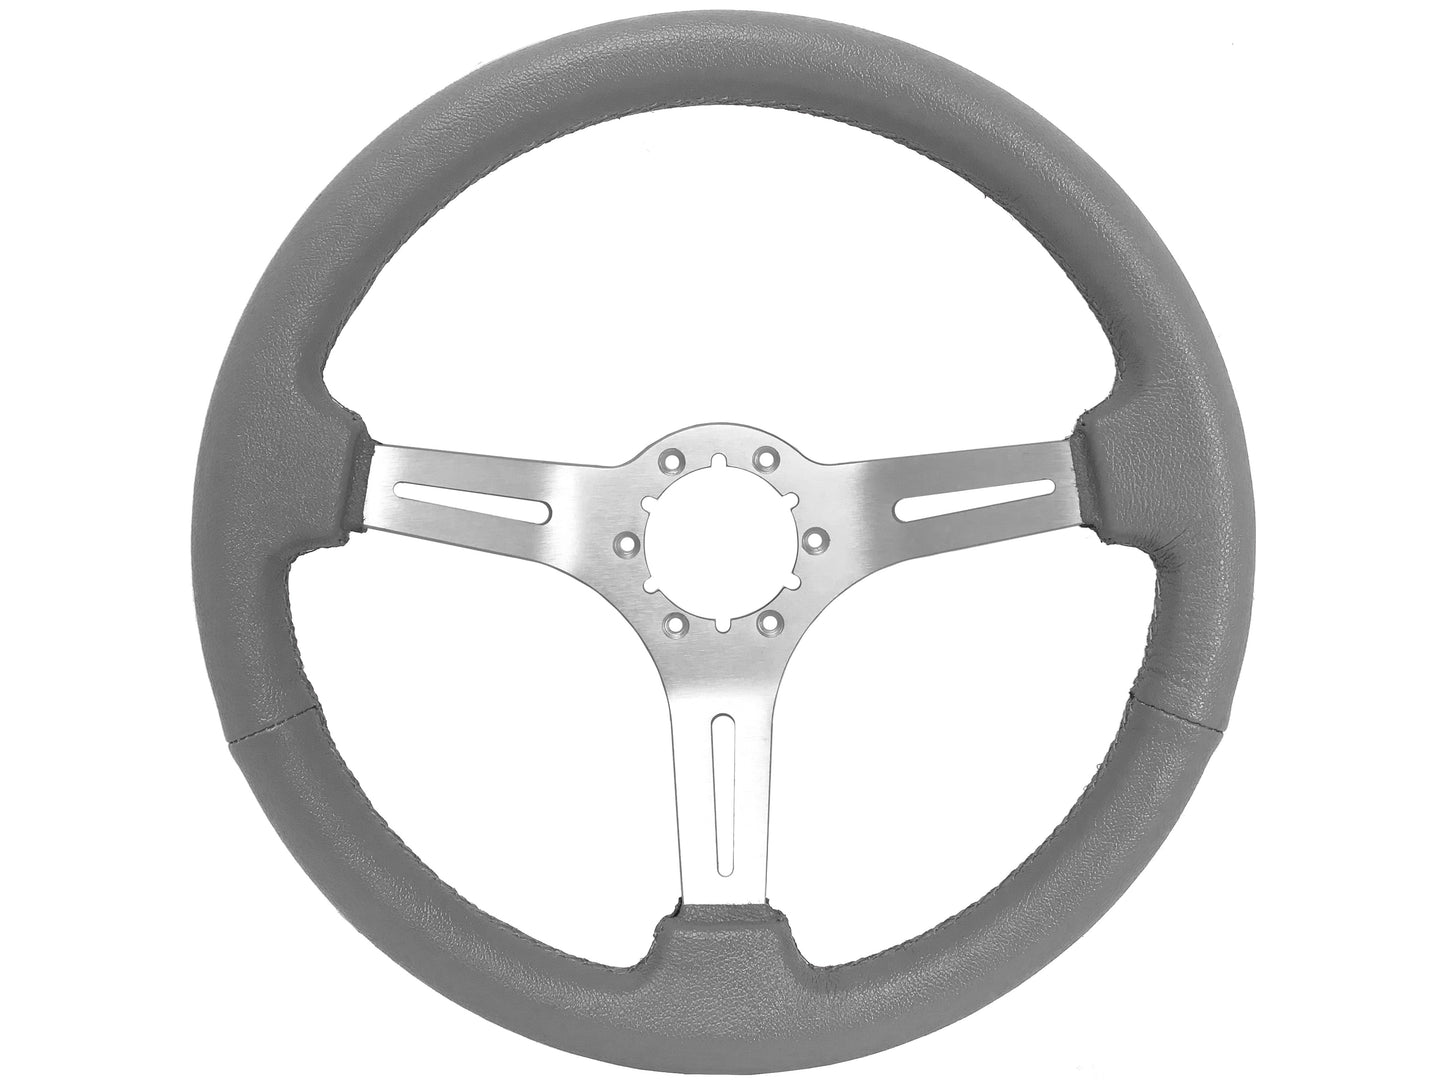 VSW S6 Sport Steering Wheel | Gray Leather Brushed Aluminum | ST3014GRY